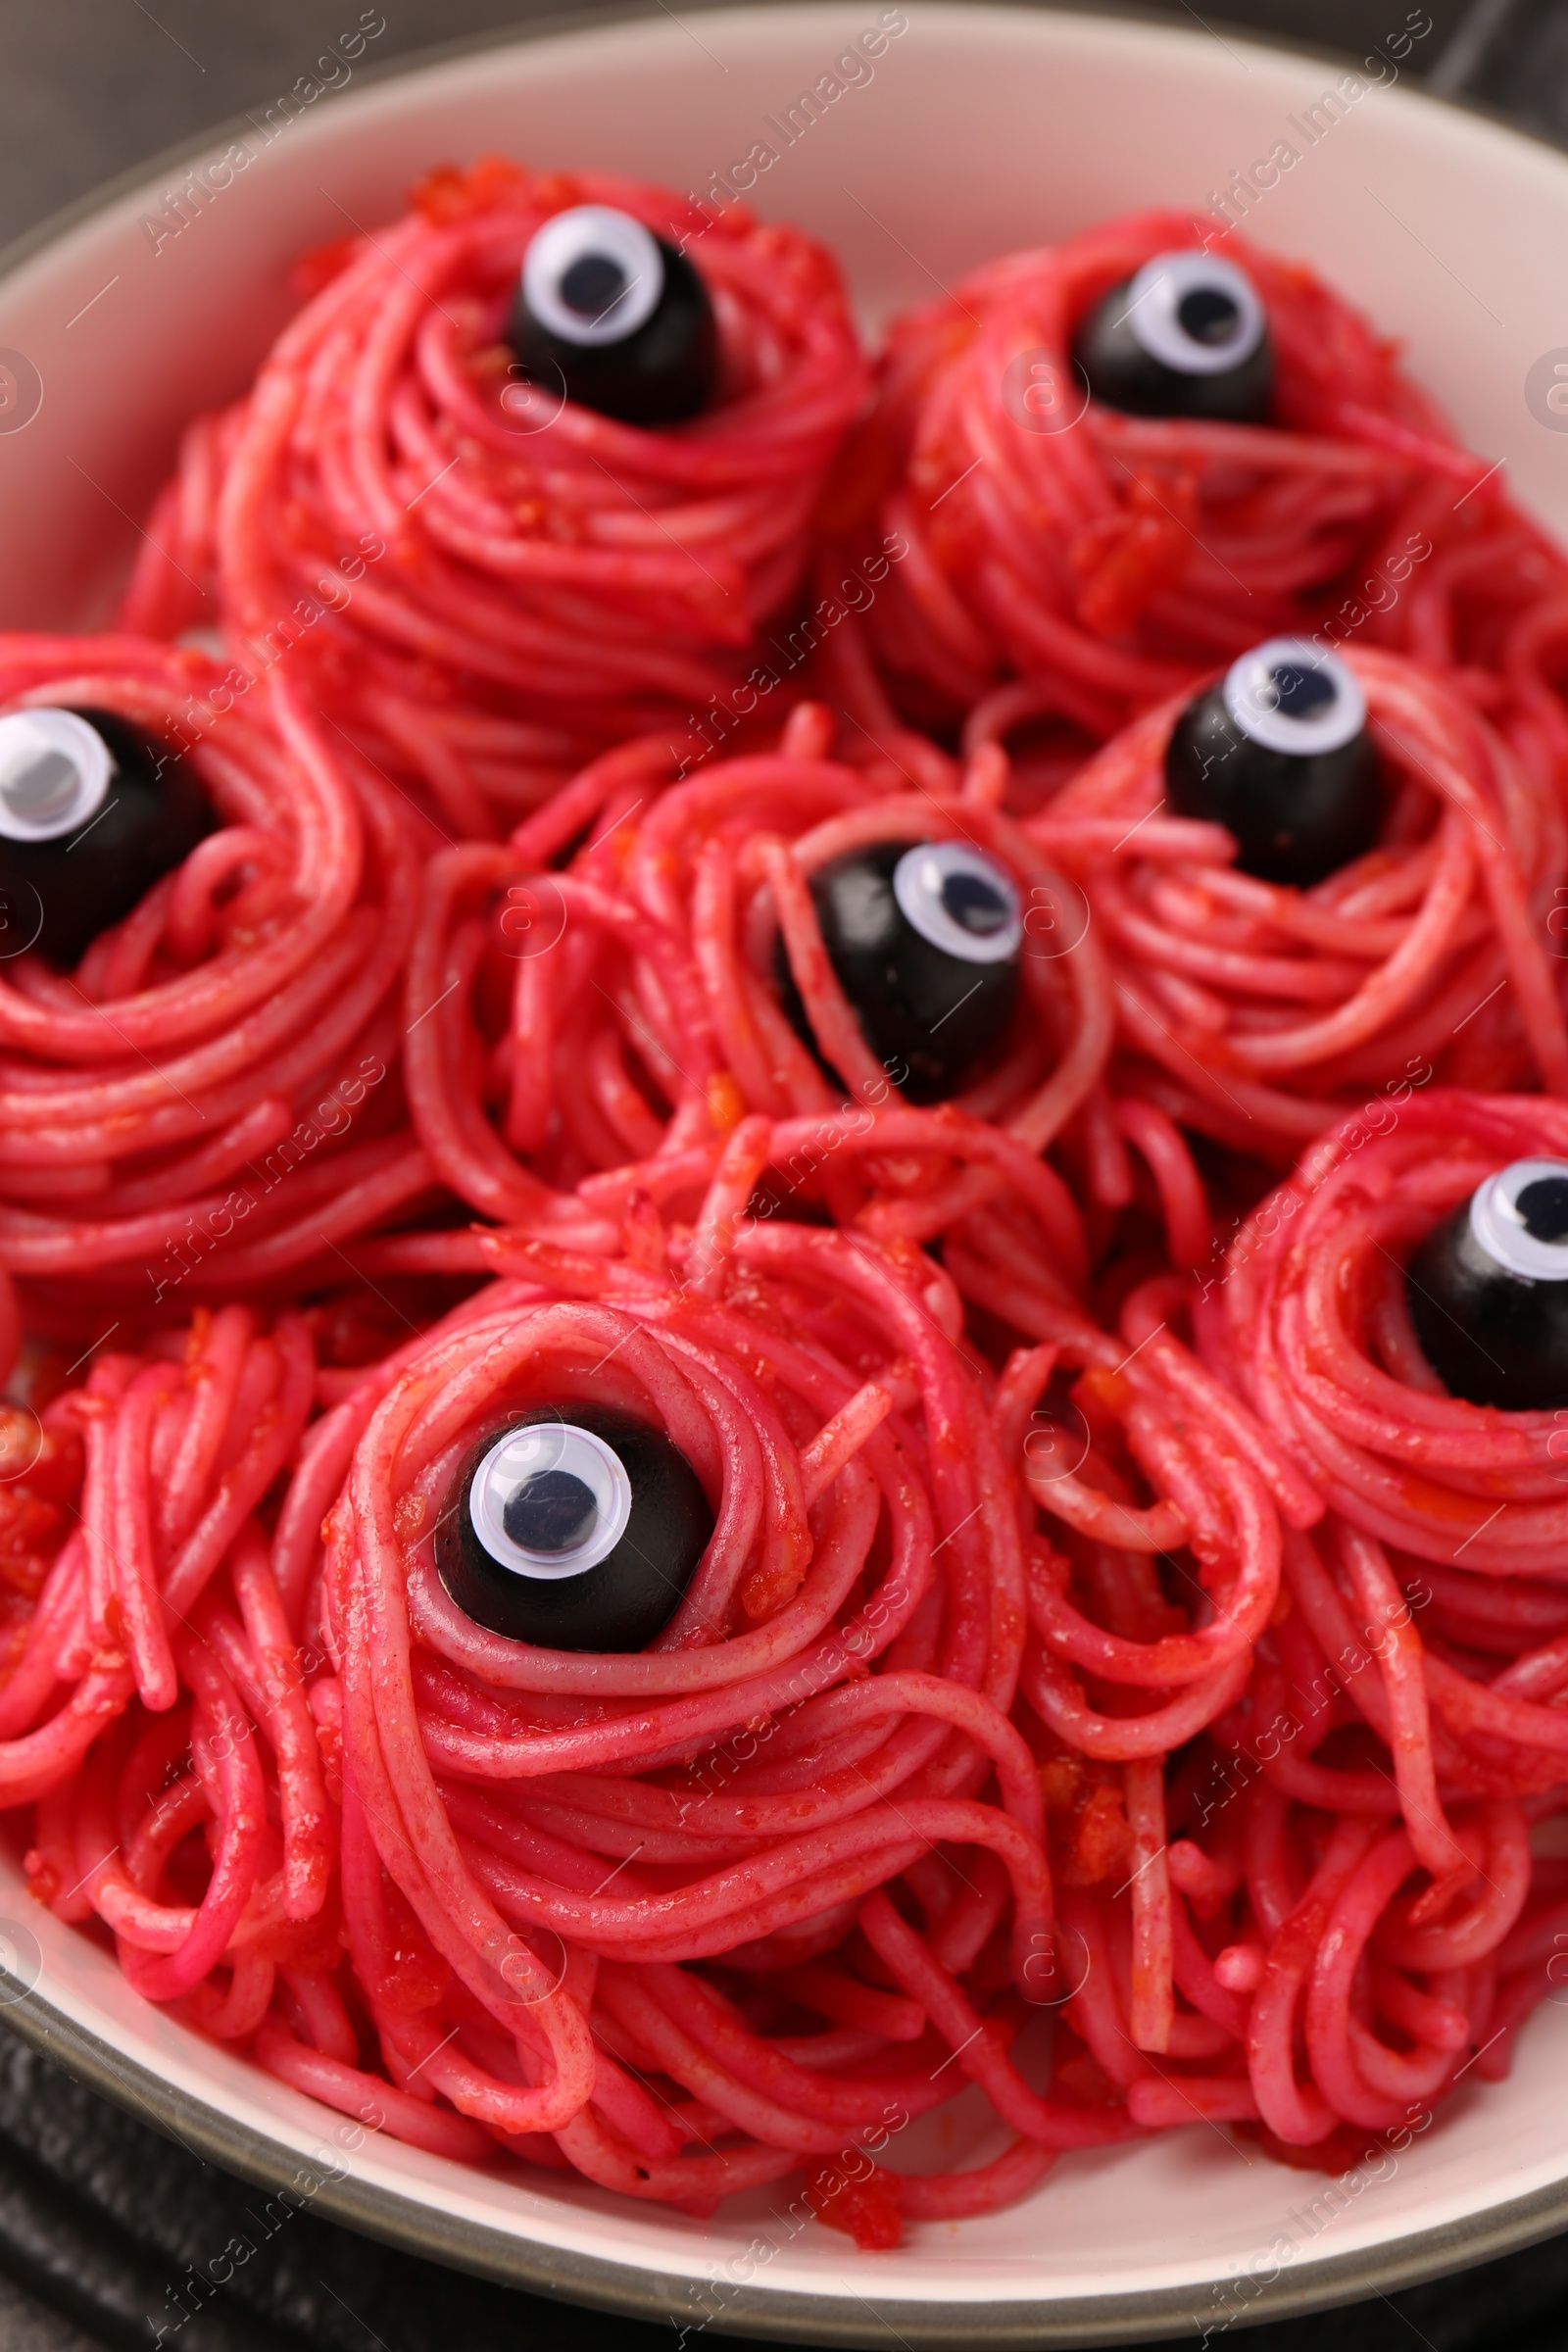 Photo of Red pasta with decorative eyes and olives in bowl on table, closeup. Halloween food